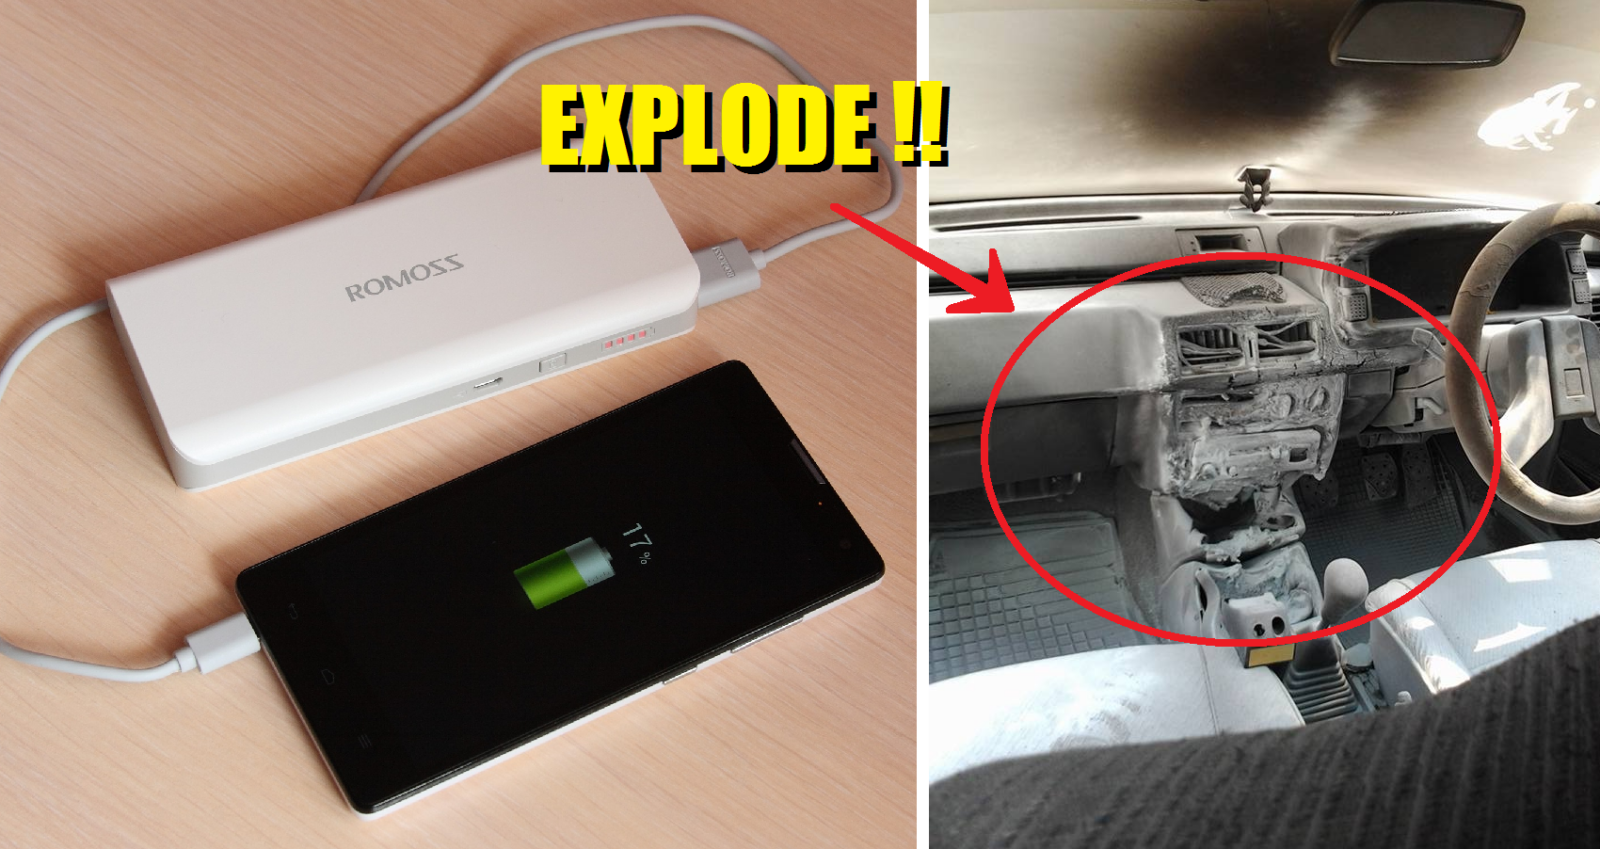 Malaysian's Car Caught On Fire After He Left Power Bank Inside - World Of Buzz 1